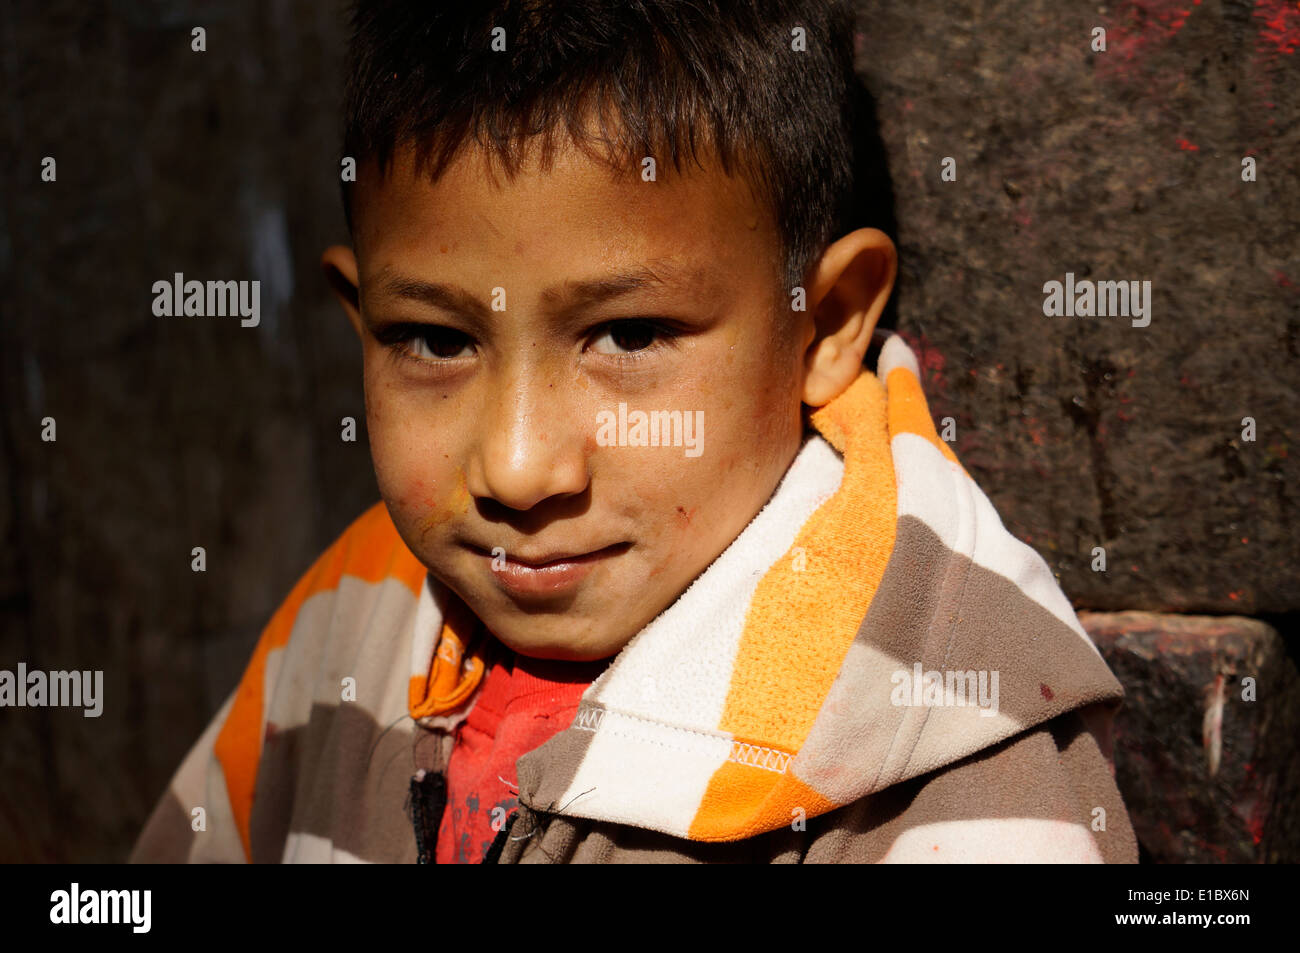 Children, Nepal,Asia,Young boy posing for portrait,candid  street, scenes photos,coldly, cute,this is life, photography Stock Photo